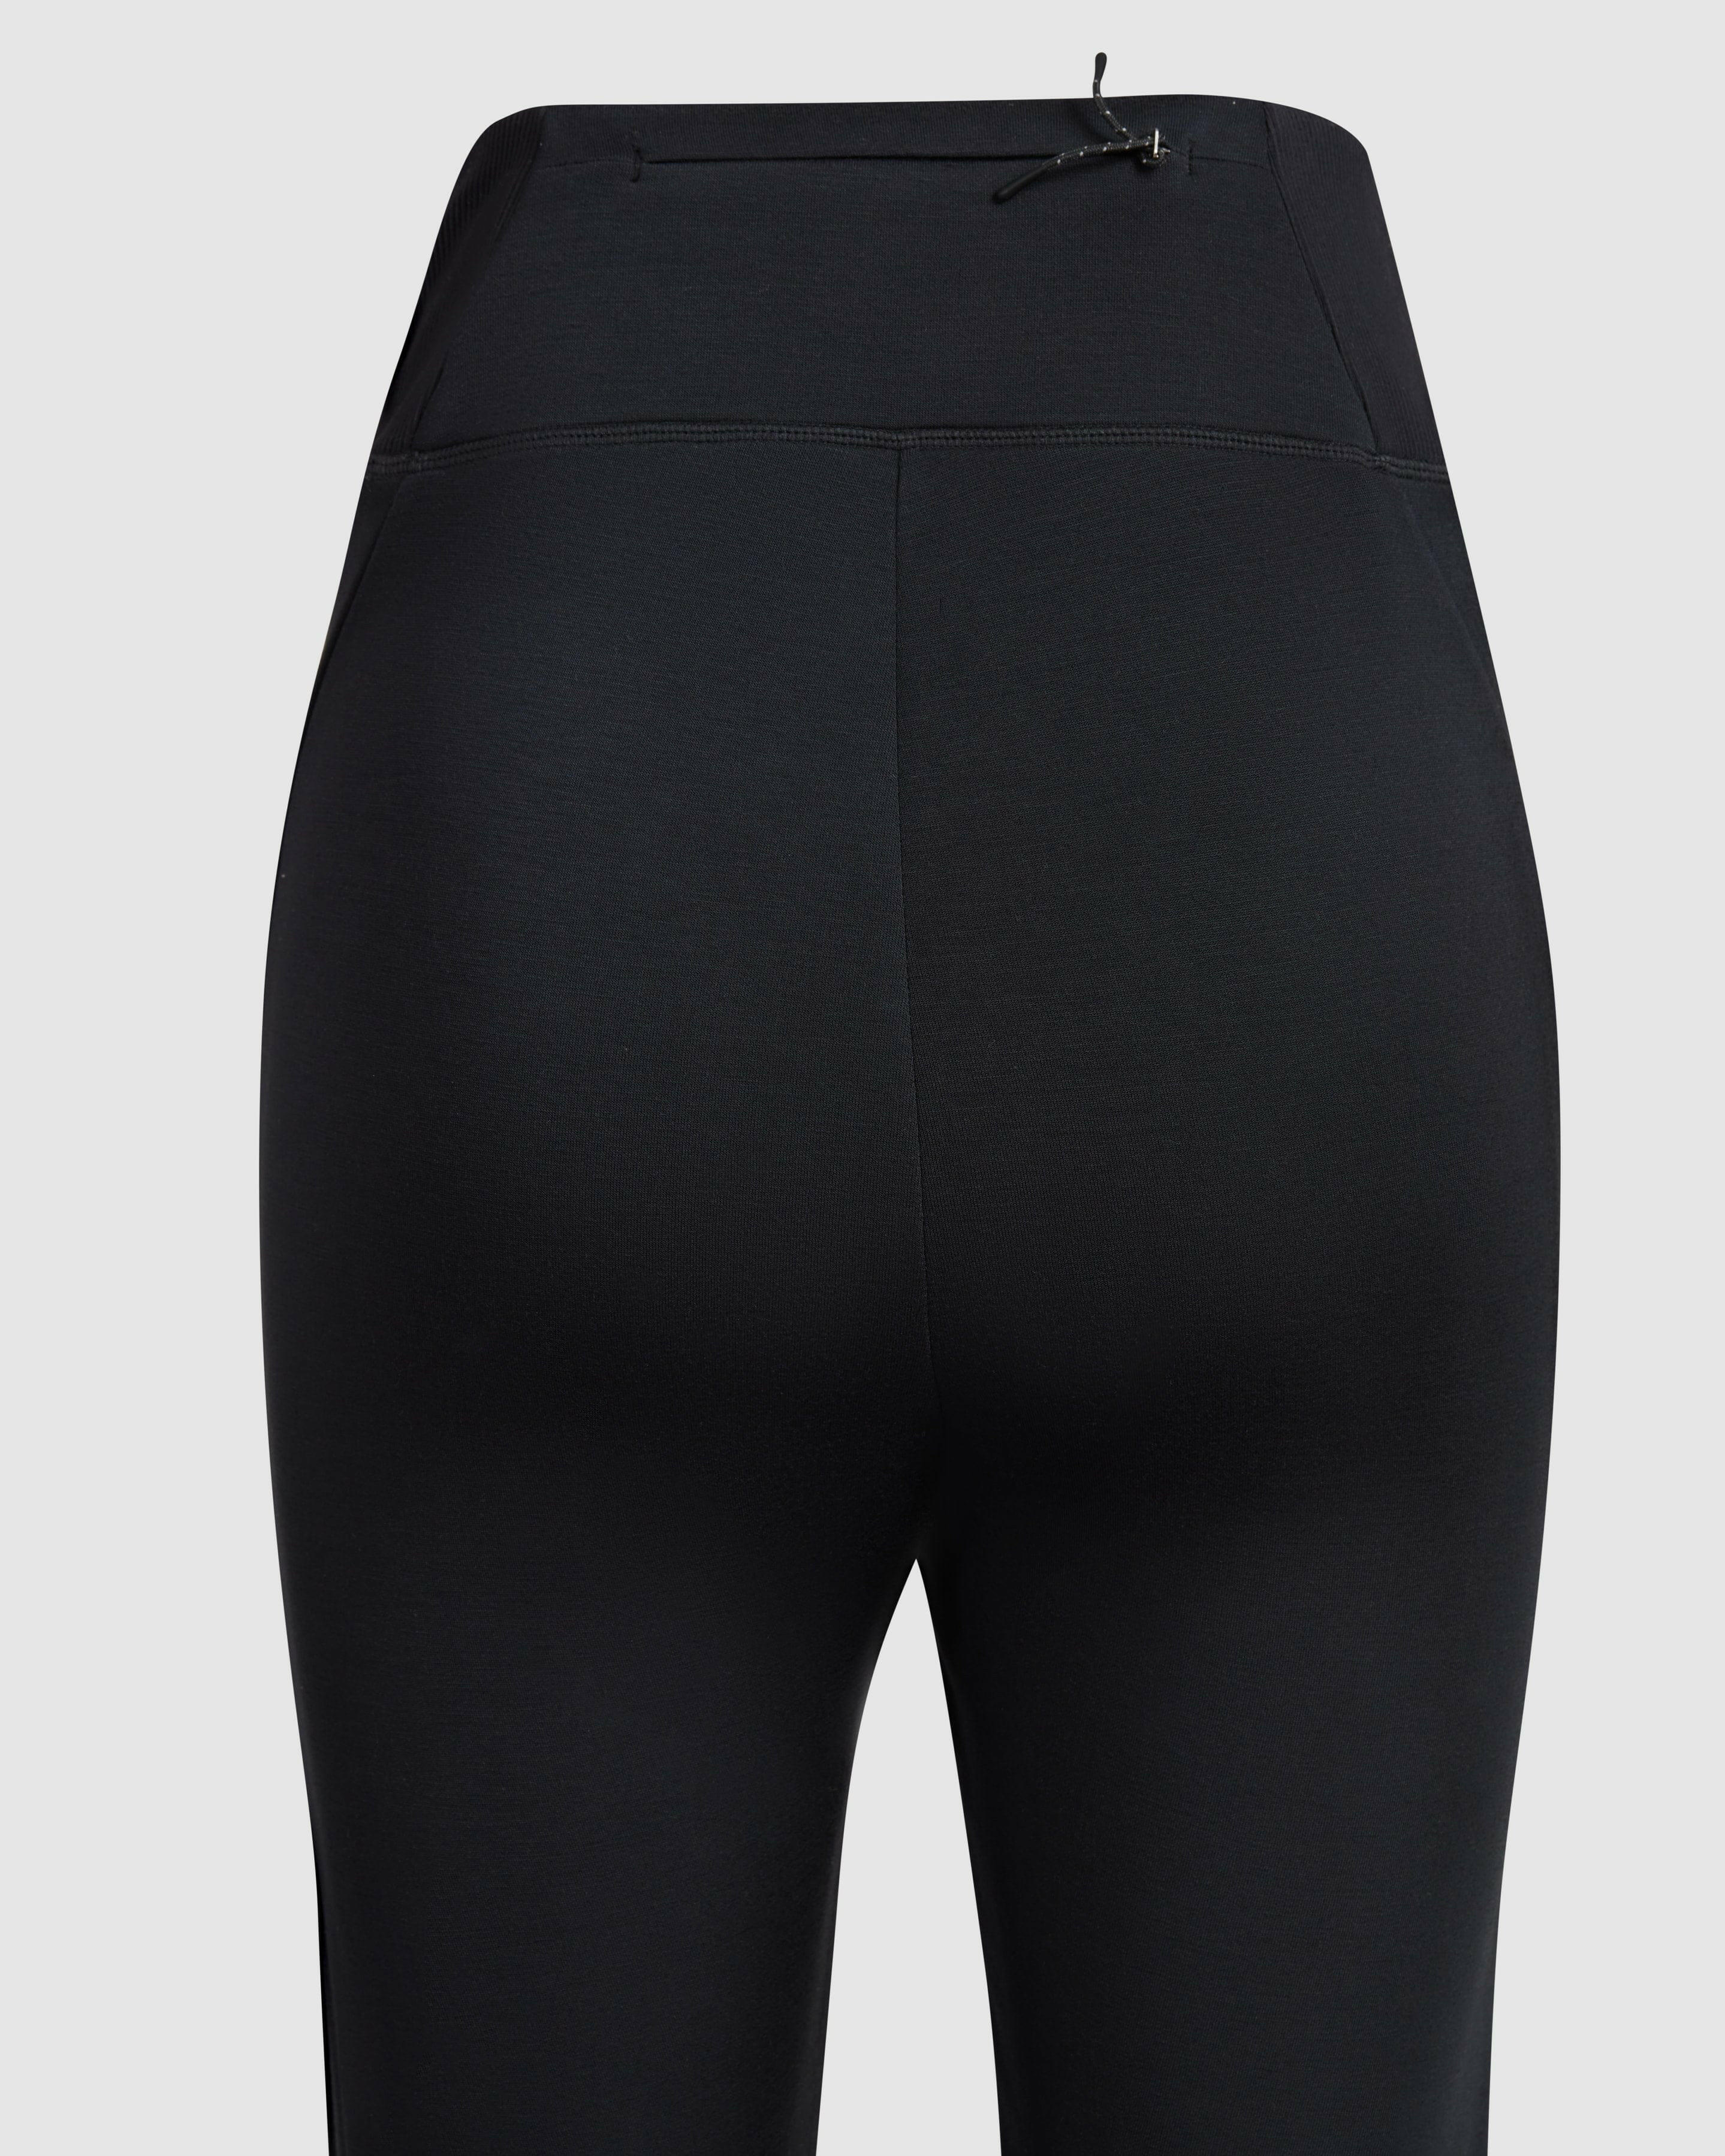 Close View of Classic black Modest JOG JOGGER by Qynda in light fabric on a white background.